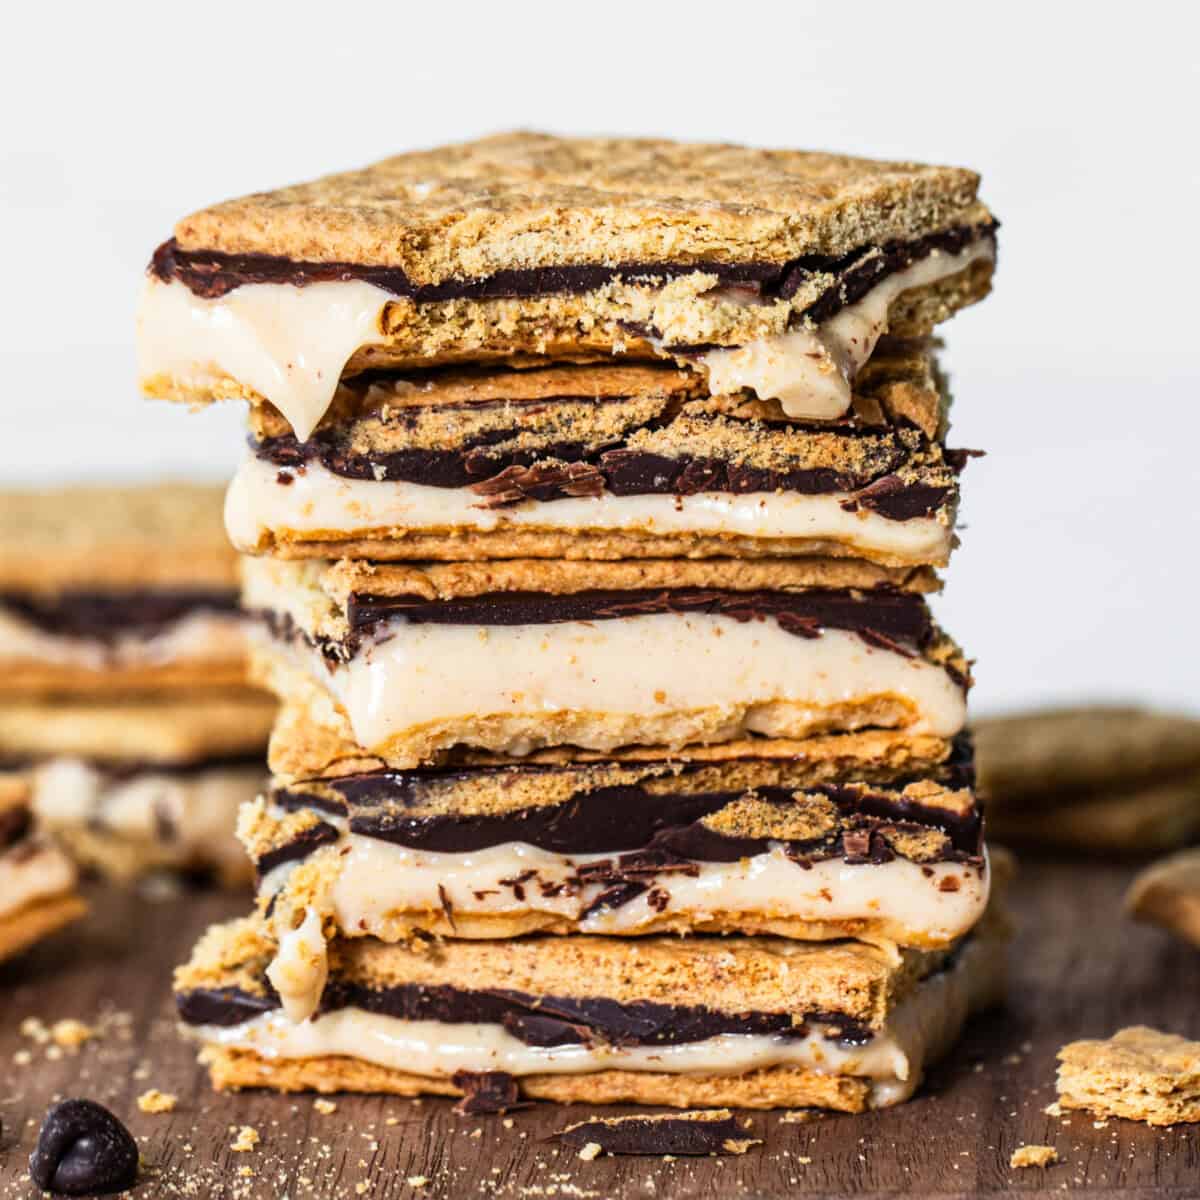 A stack of s'mores with melted marshmallows and chocolate between graham crackers, set against a wooden backdrop.